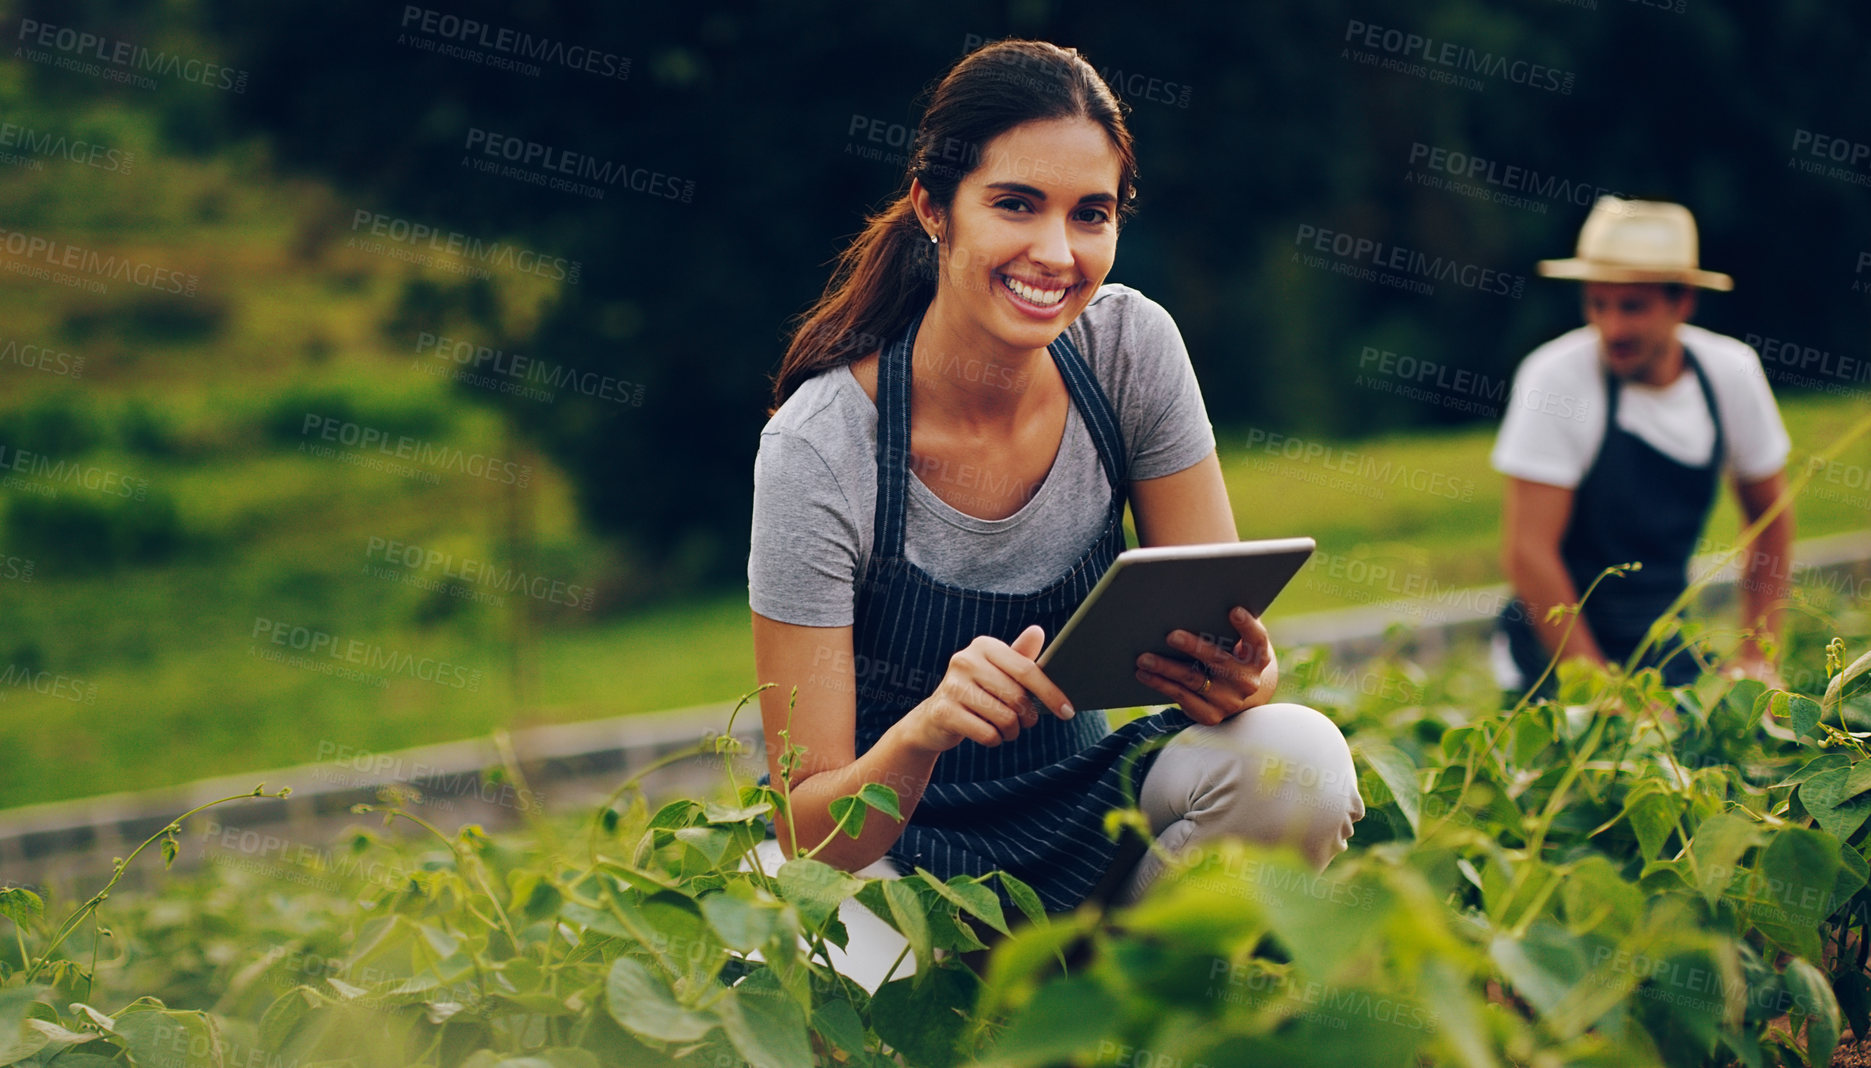 Buy stock photo Portrait of a young woman using a digital tablet while working in a garden with her husband in the background